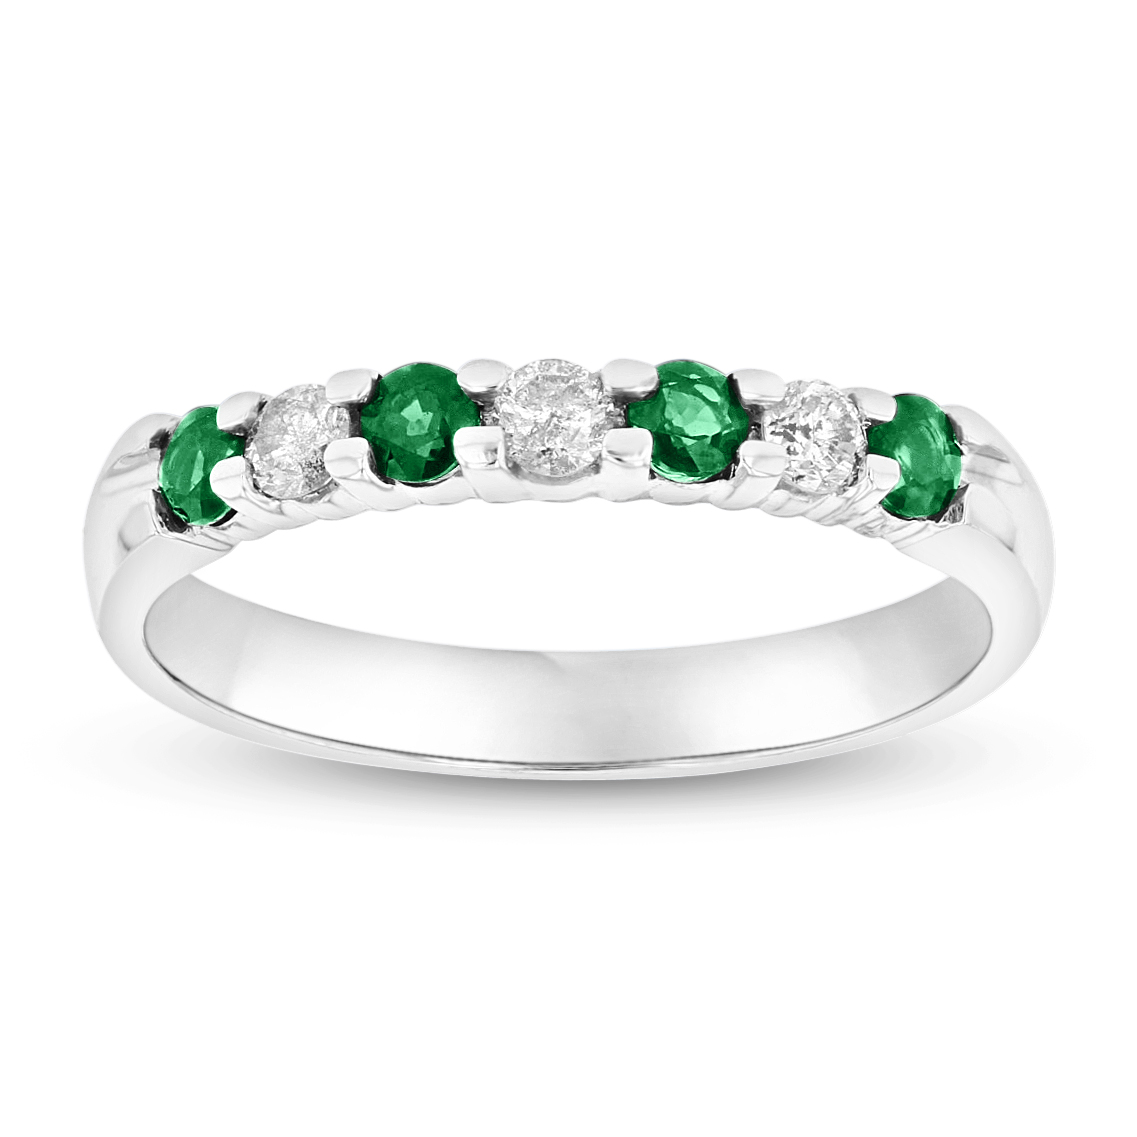 View 14K Gold Ring 0.54ct tw Round Diamonds and Emeralds Prong Set Band